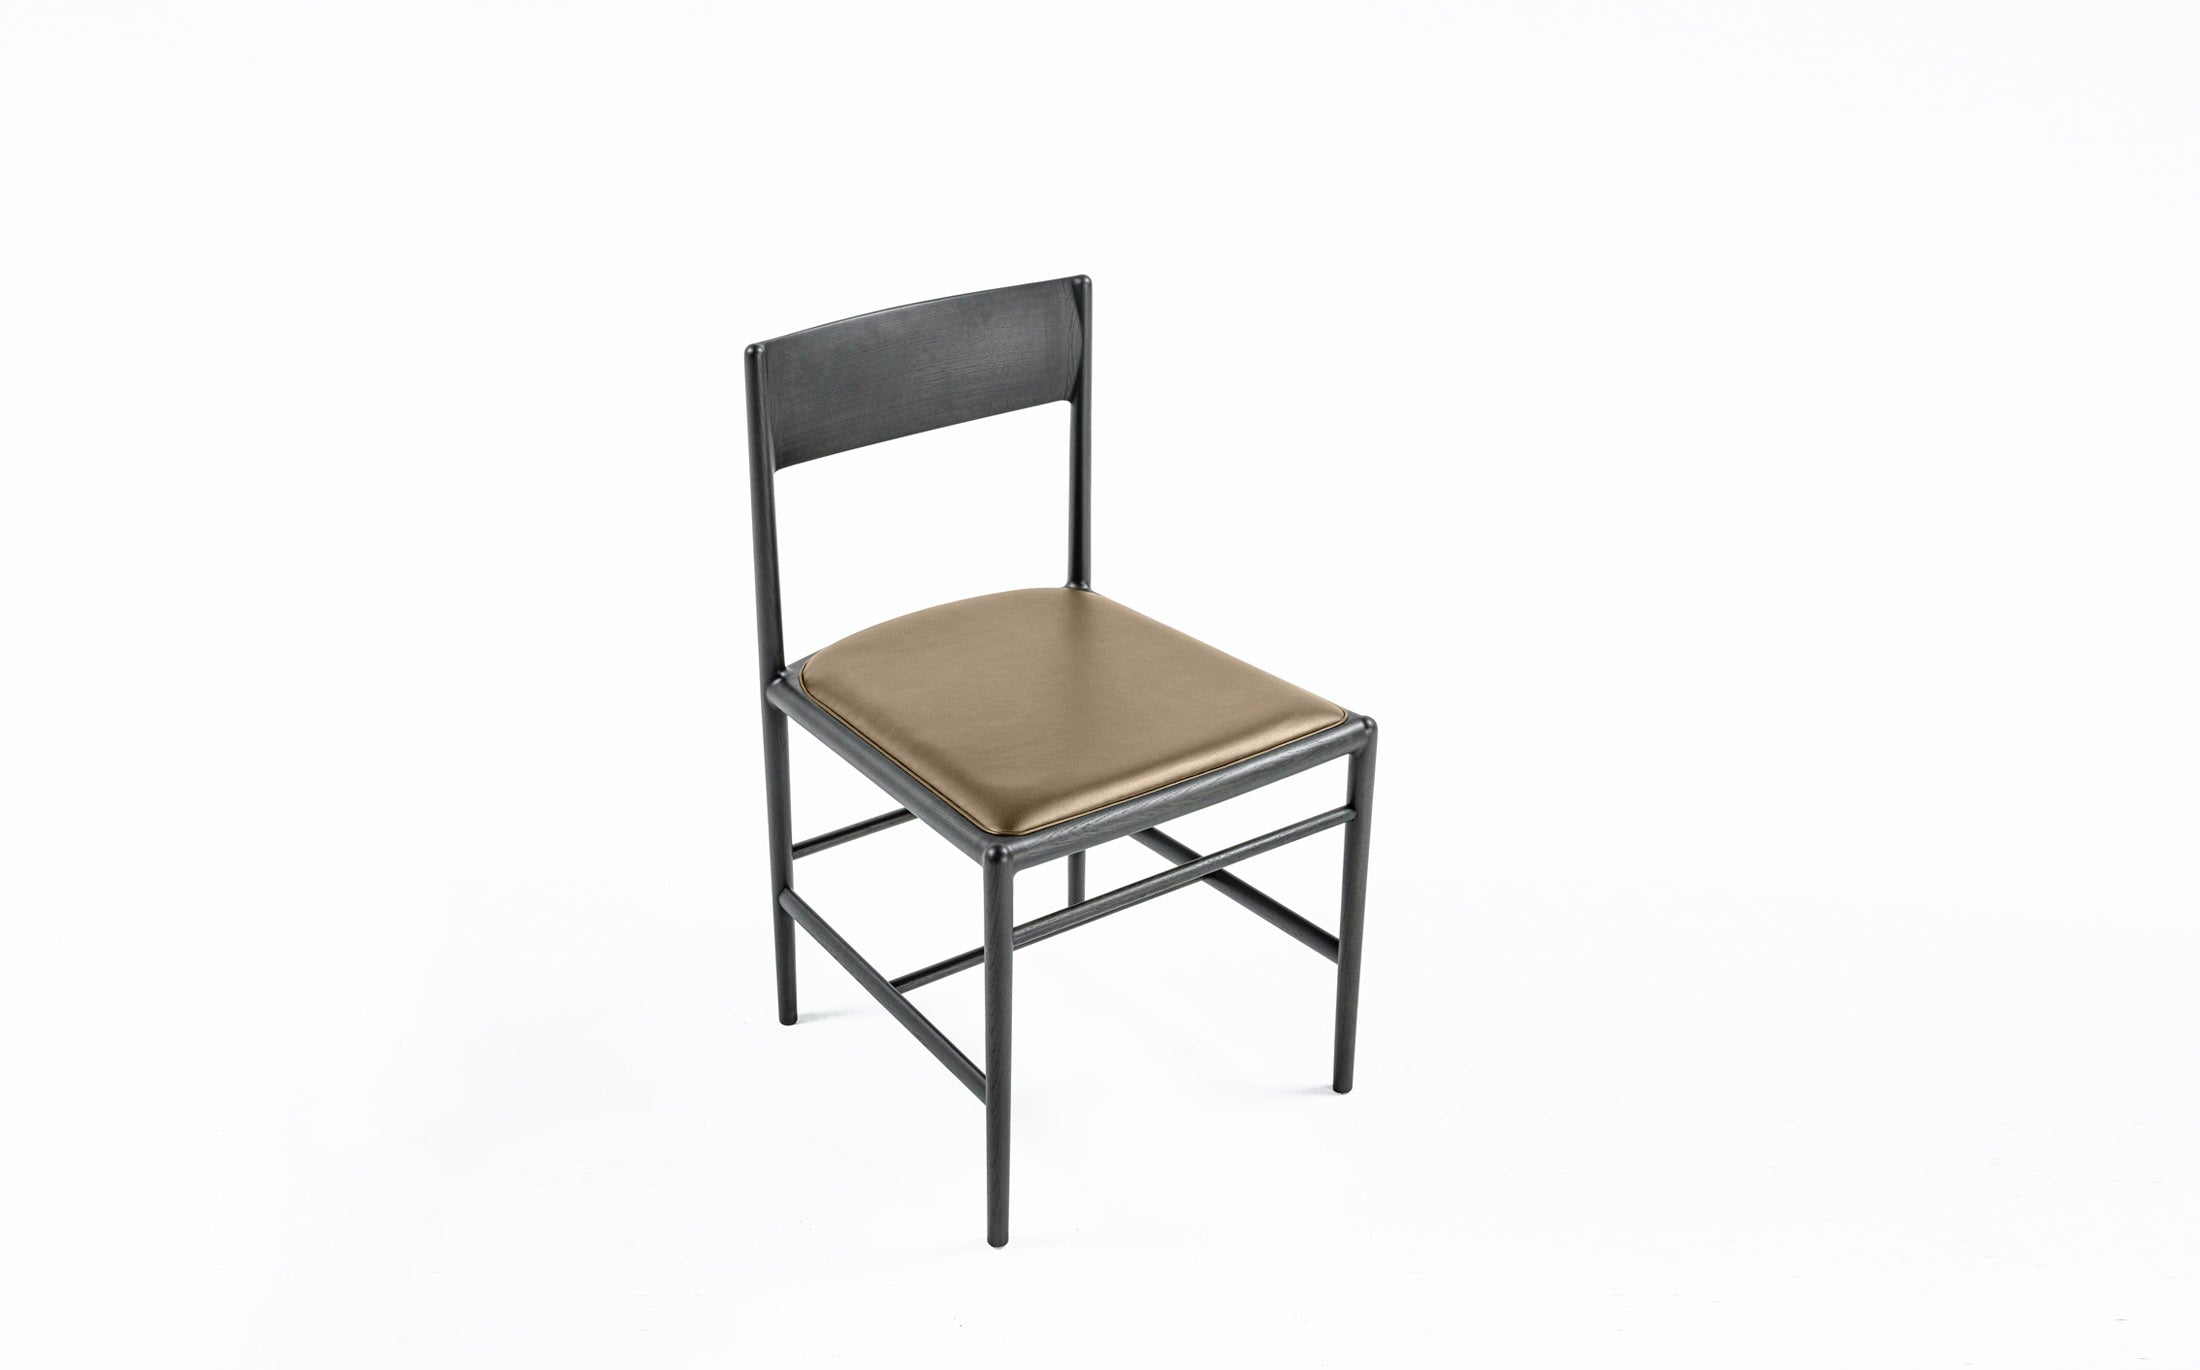 A chair on the vertical axis 